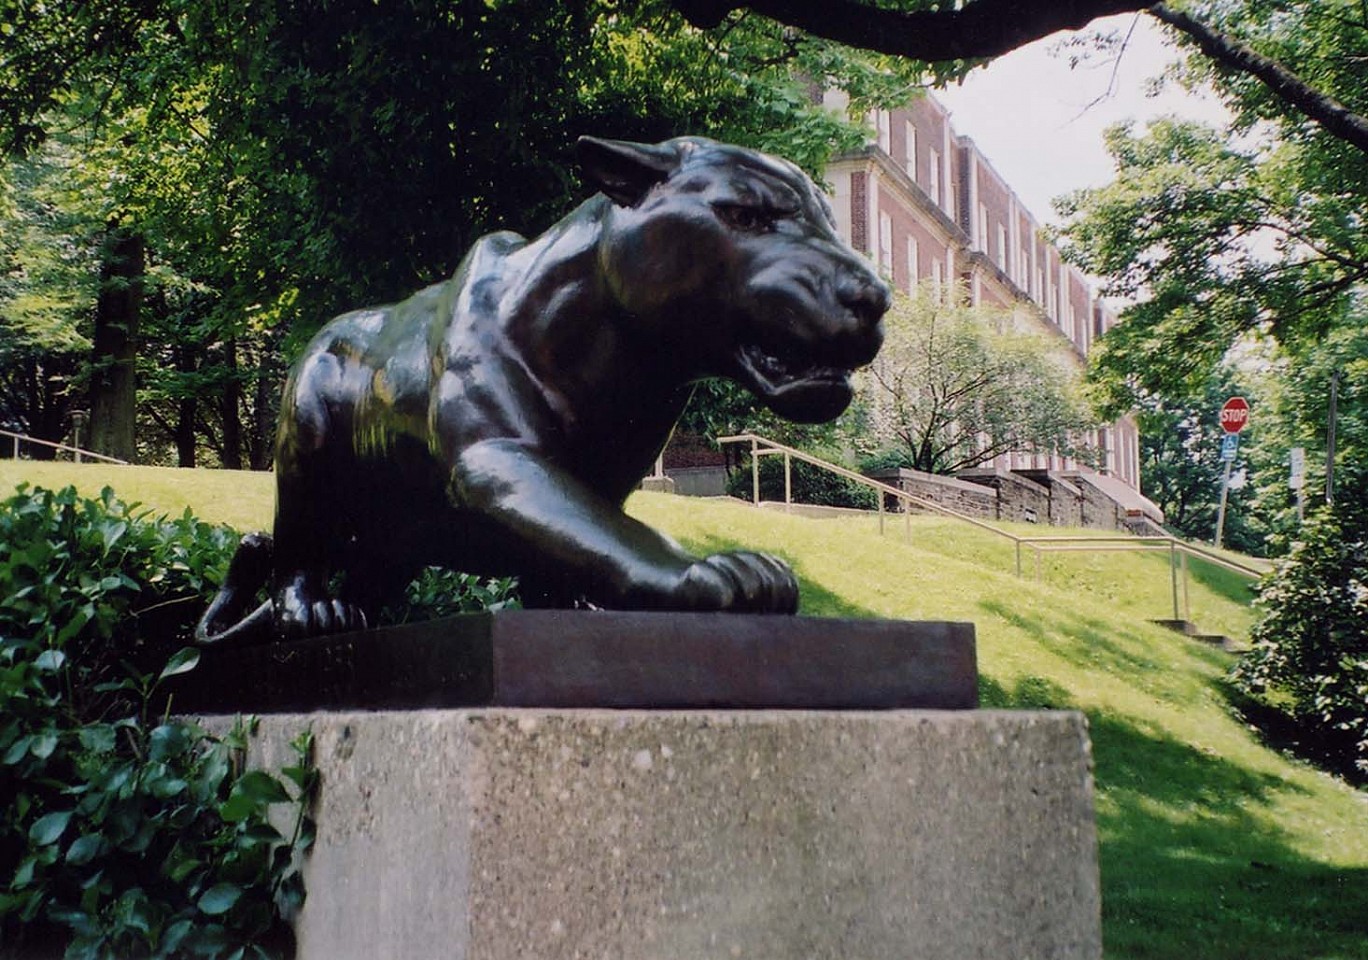 Edgar Zell STEEVER, Stalking Leopard, 1959 ca
bronze, 93 1/2 x 23 in.
Stalking stance of a leopard on concrete base.
2009.01.09
ADDITIONAL INFORMATION: Cast at Beddi-Rassy Foundry, 227 India Street, Brooklyn, NY 11222 (Beddy-Makky Foundry since 1960). There is also a plaster cast of this sculpture in KHCR 303 art storage. Sculpture associated with Lafayette Football.
Credit Line: Lafayette College Art Collection, Easton, PA; Gift of class of 1958